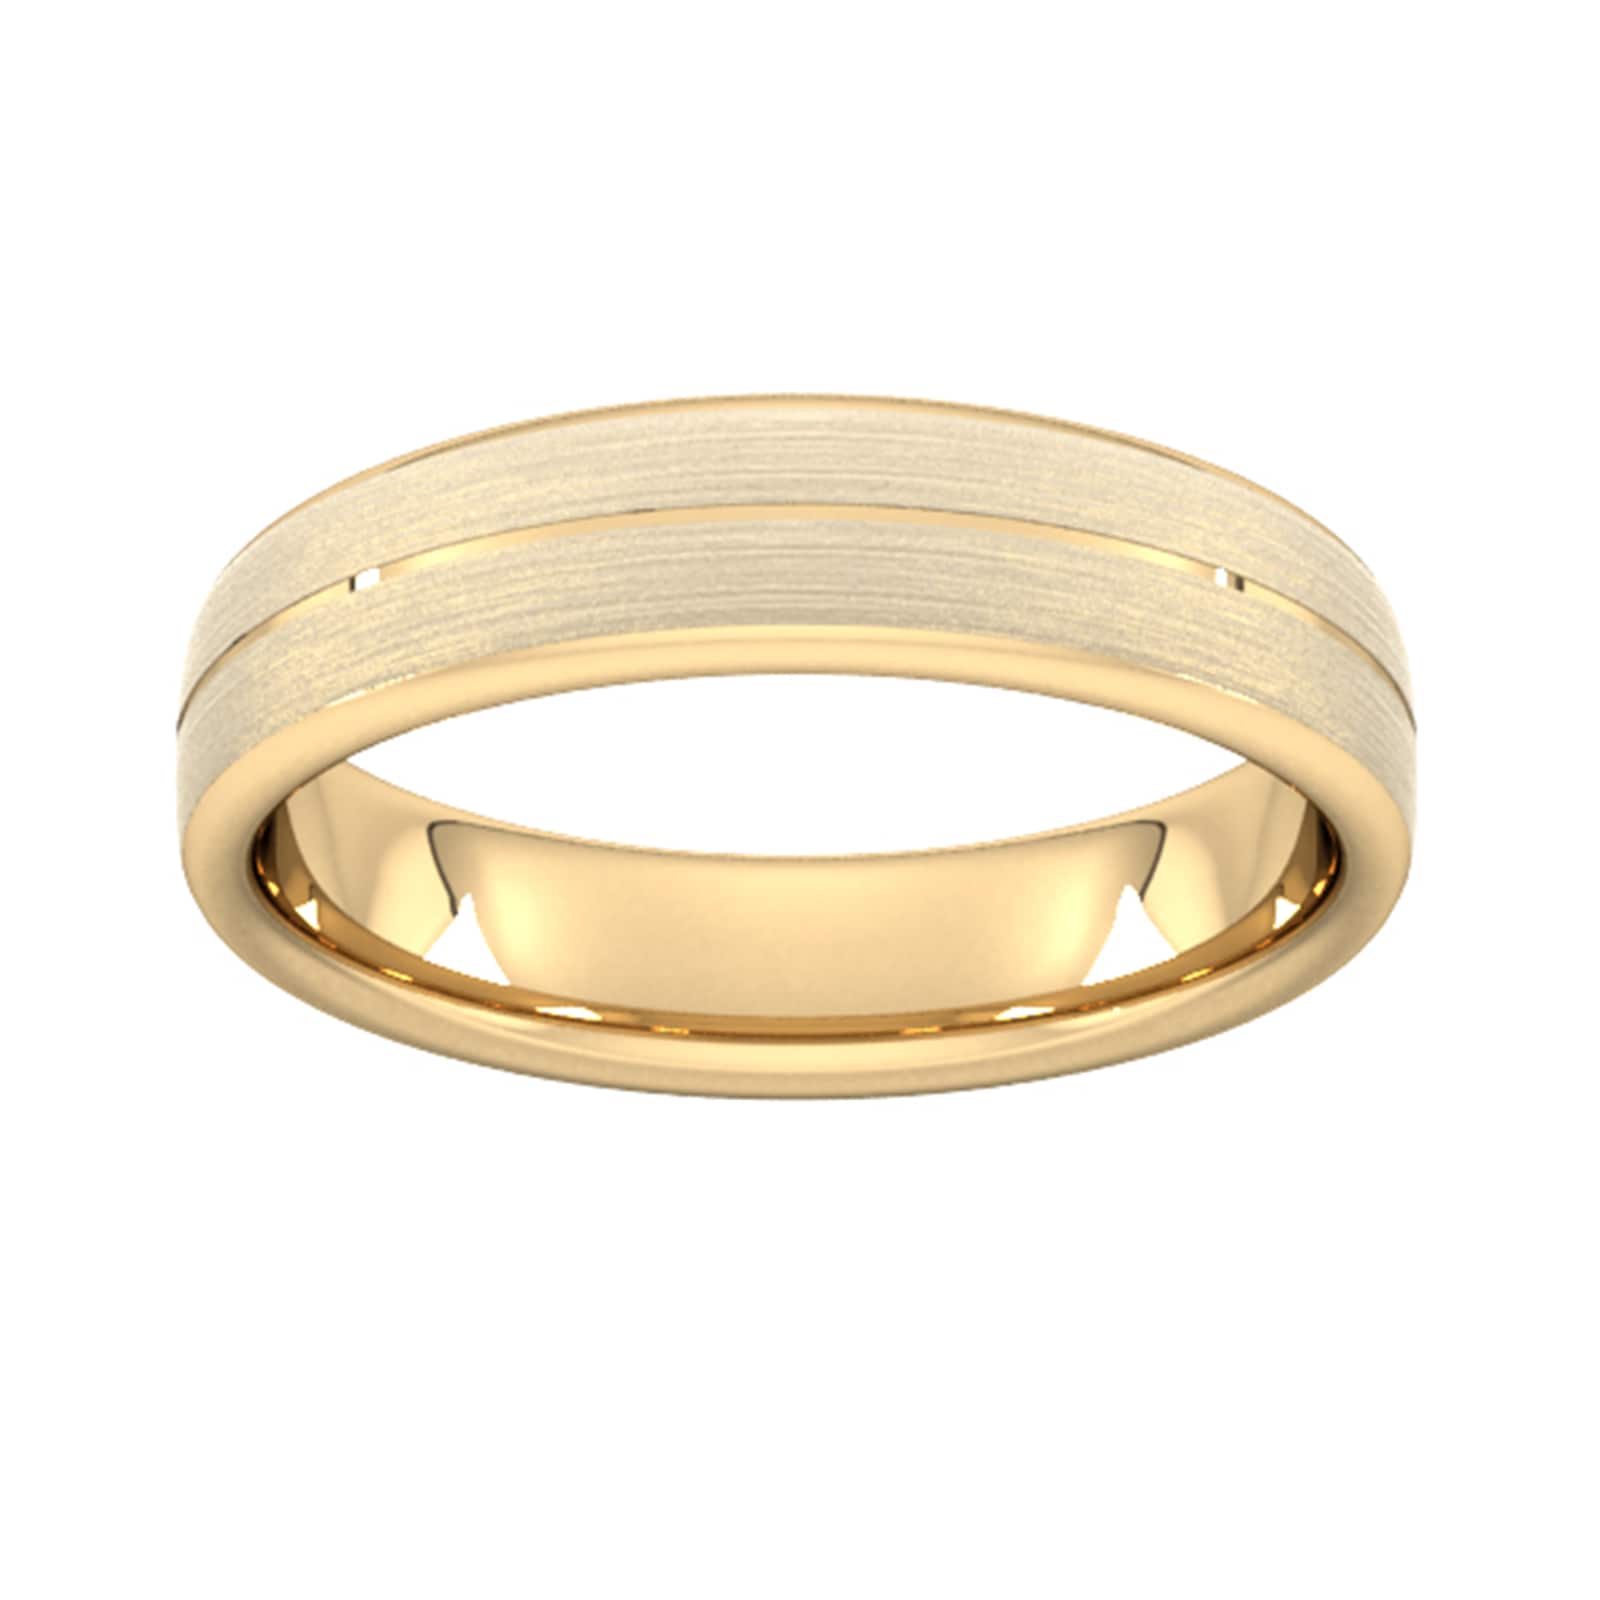 5mm D Shape Standard Centre Groove With Chamfered Edge Wedding Ring In 18 Carat Yellow Gold - Ring Size X